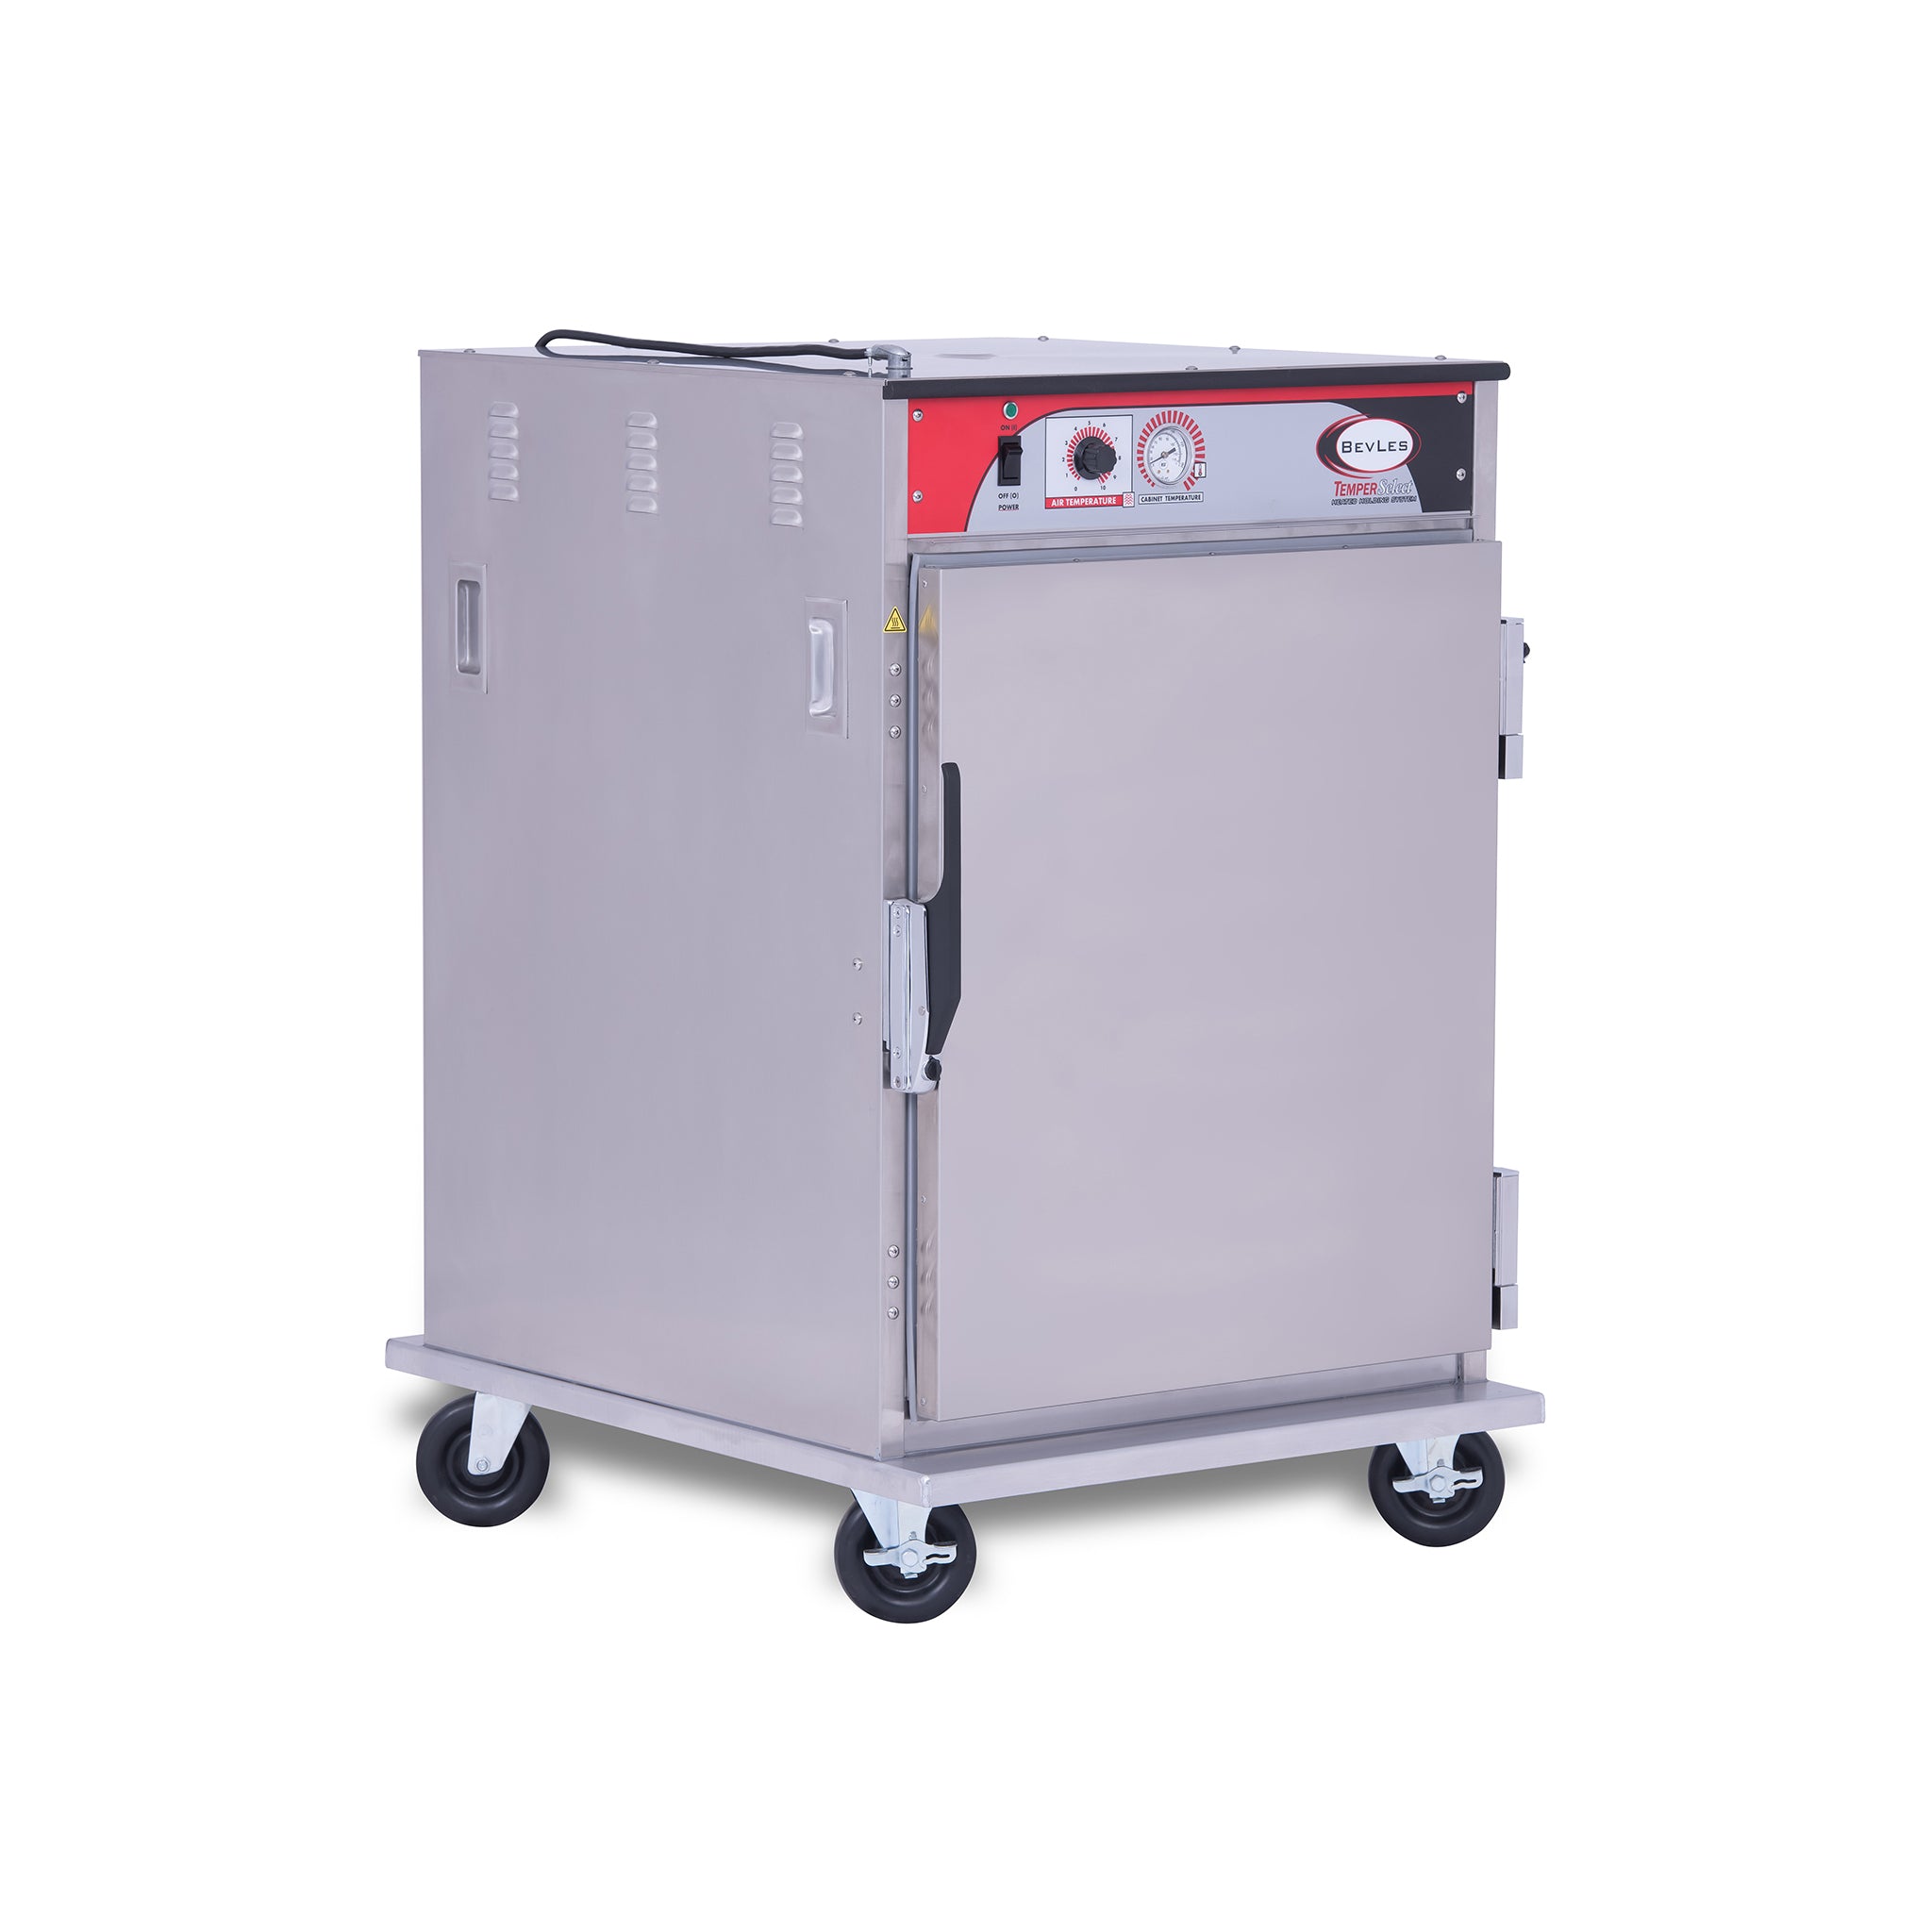 BevLes - HTSS44W64-PT, BevLes Temper Select - Pass Thru 1/2 Size Heated Holding Cabinet, Universal Width, 230V, in Silver